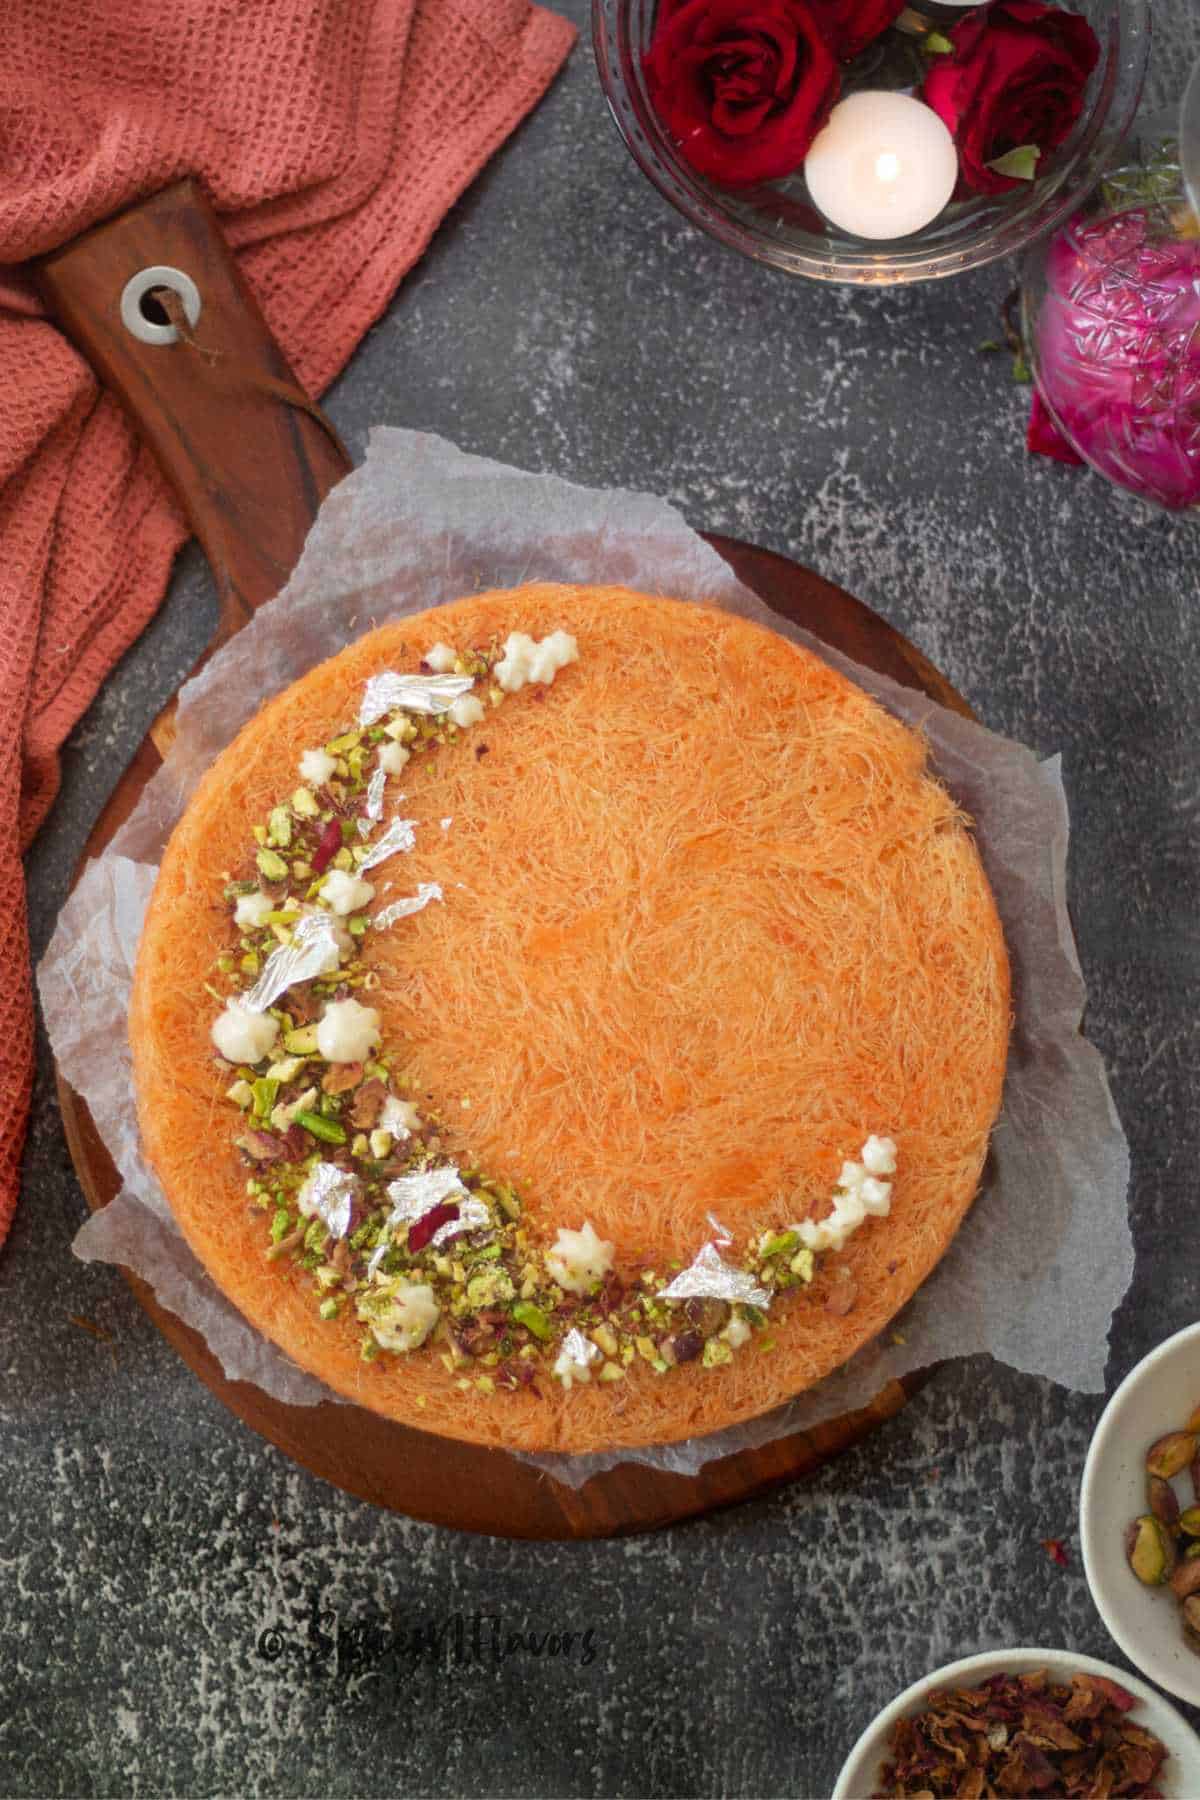 baked kunafa garnished with pistachio and rose petals placed on a wooden serving platter 